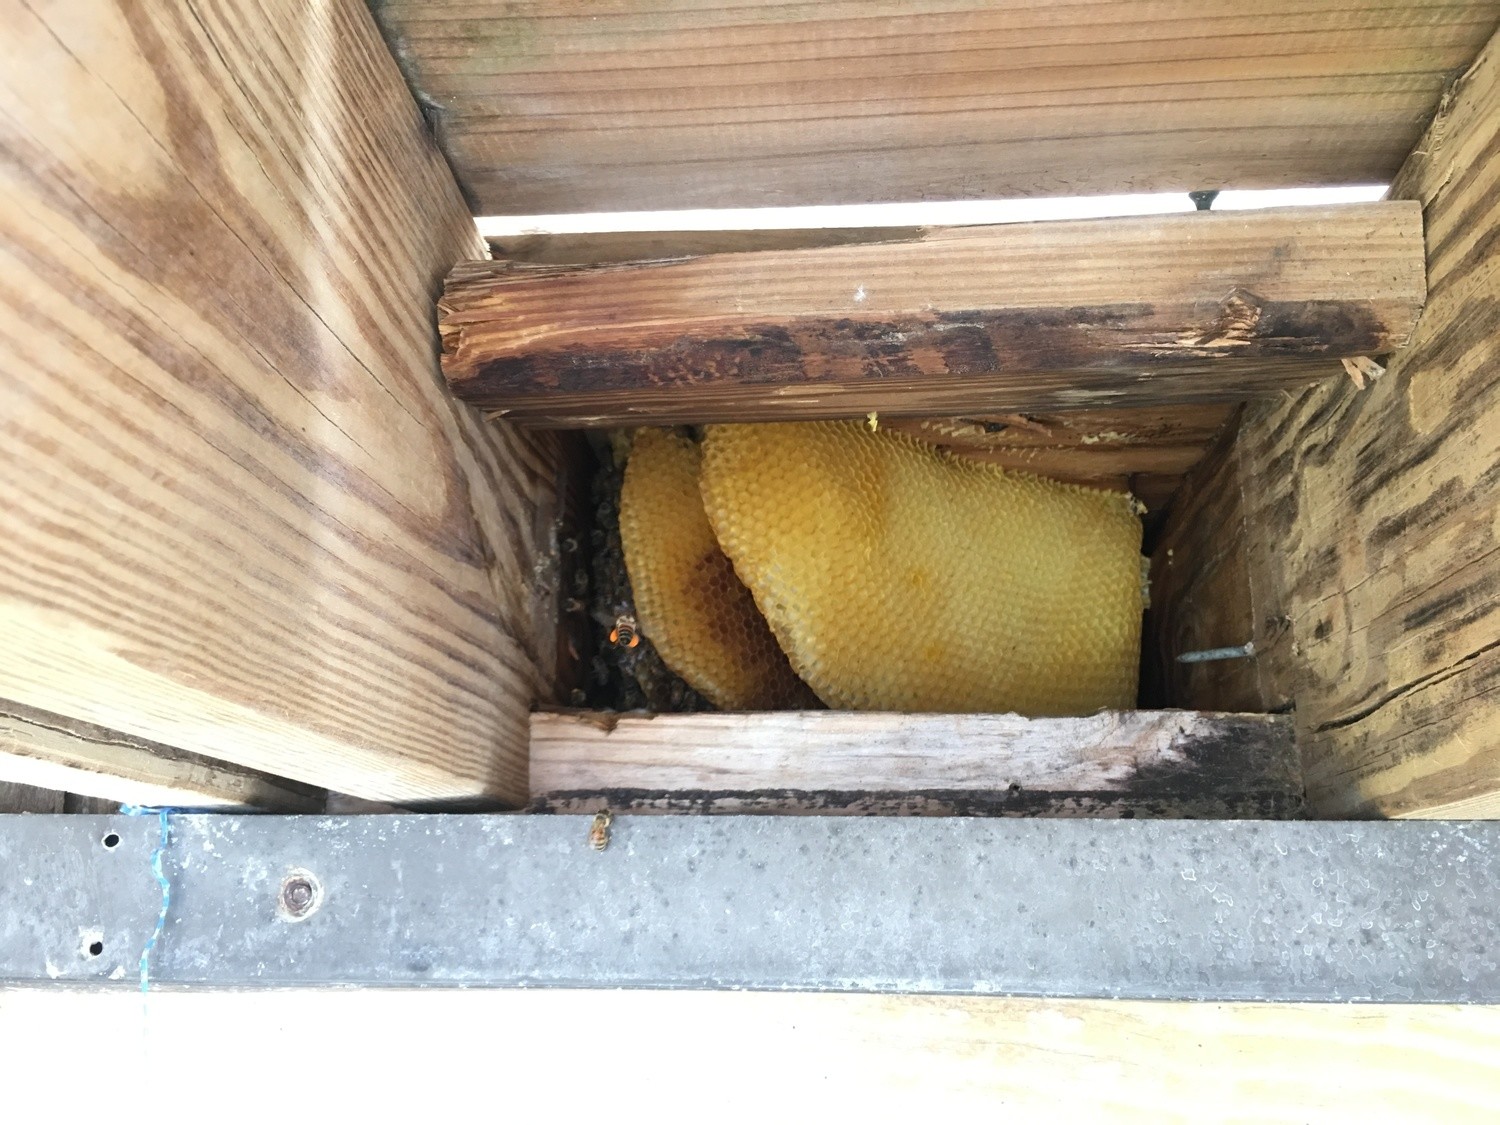 Live Bee Removal & Relocations | Florida